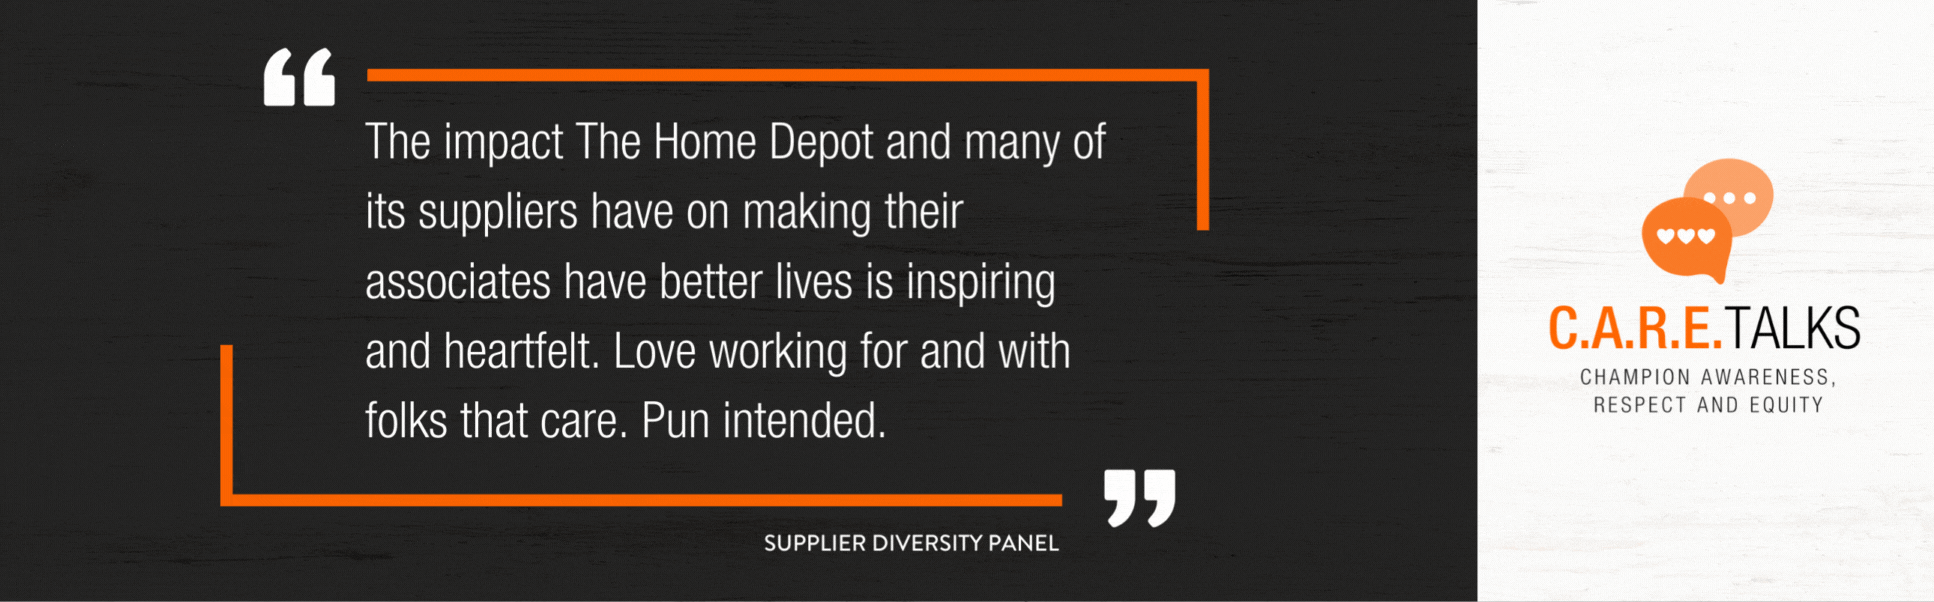 Associate testimonials about Home Depot culture and values